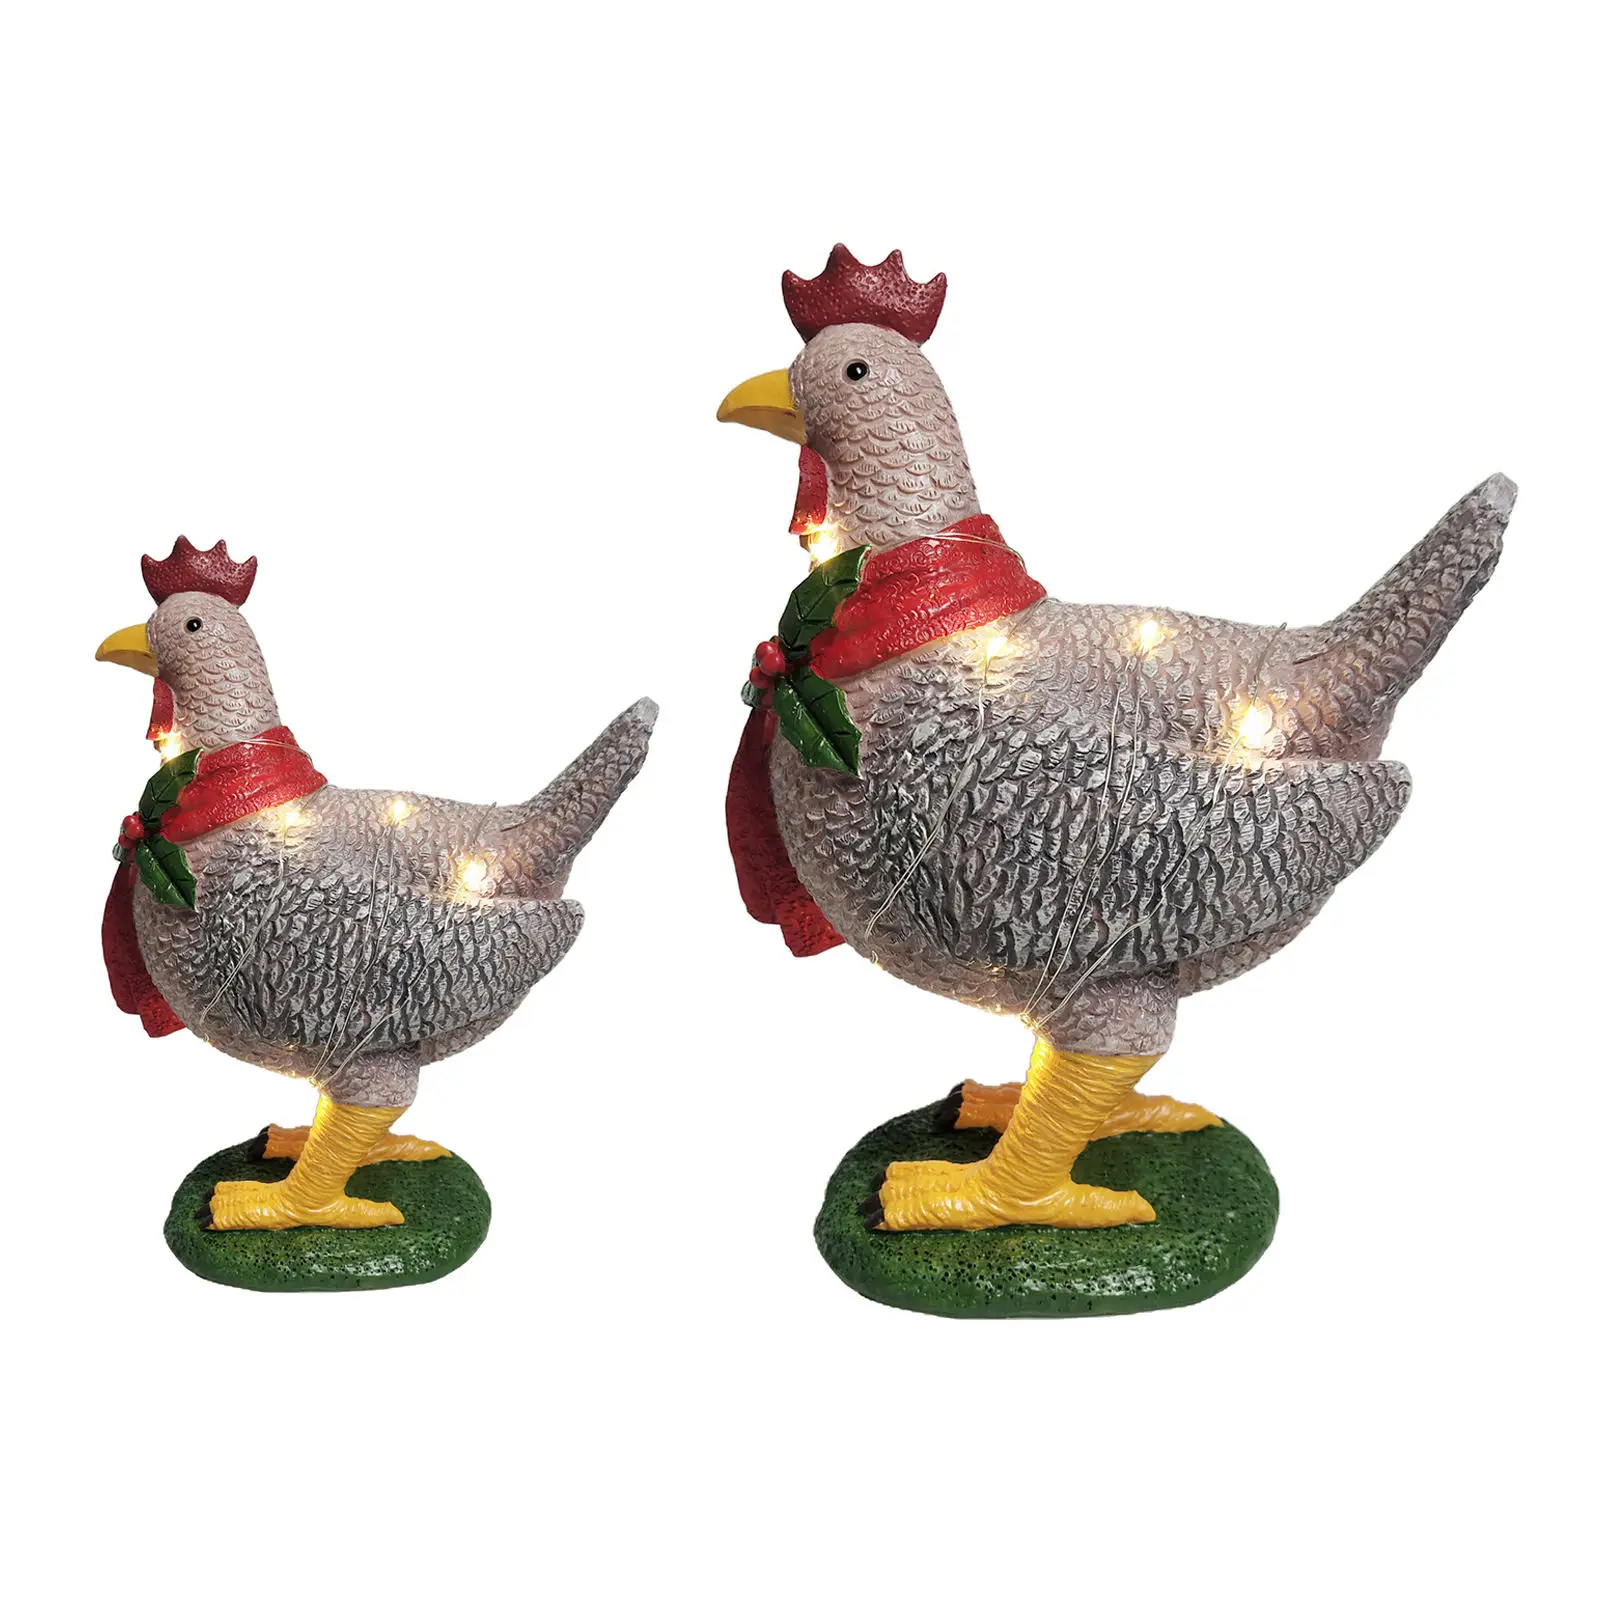 Lantern Chicken Outdoor Christmas Ornaments Light-up Chicken with Scarf for Yard Christmas Gifts